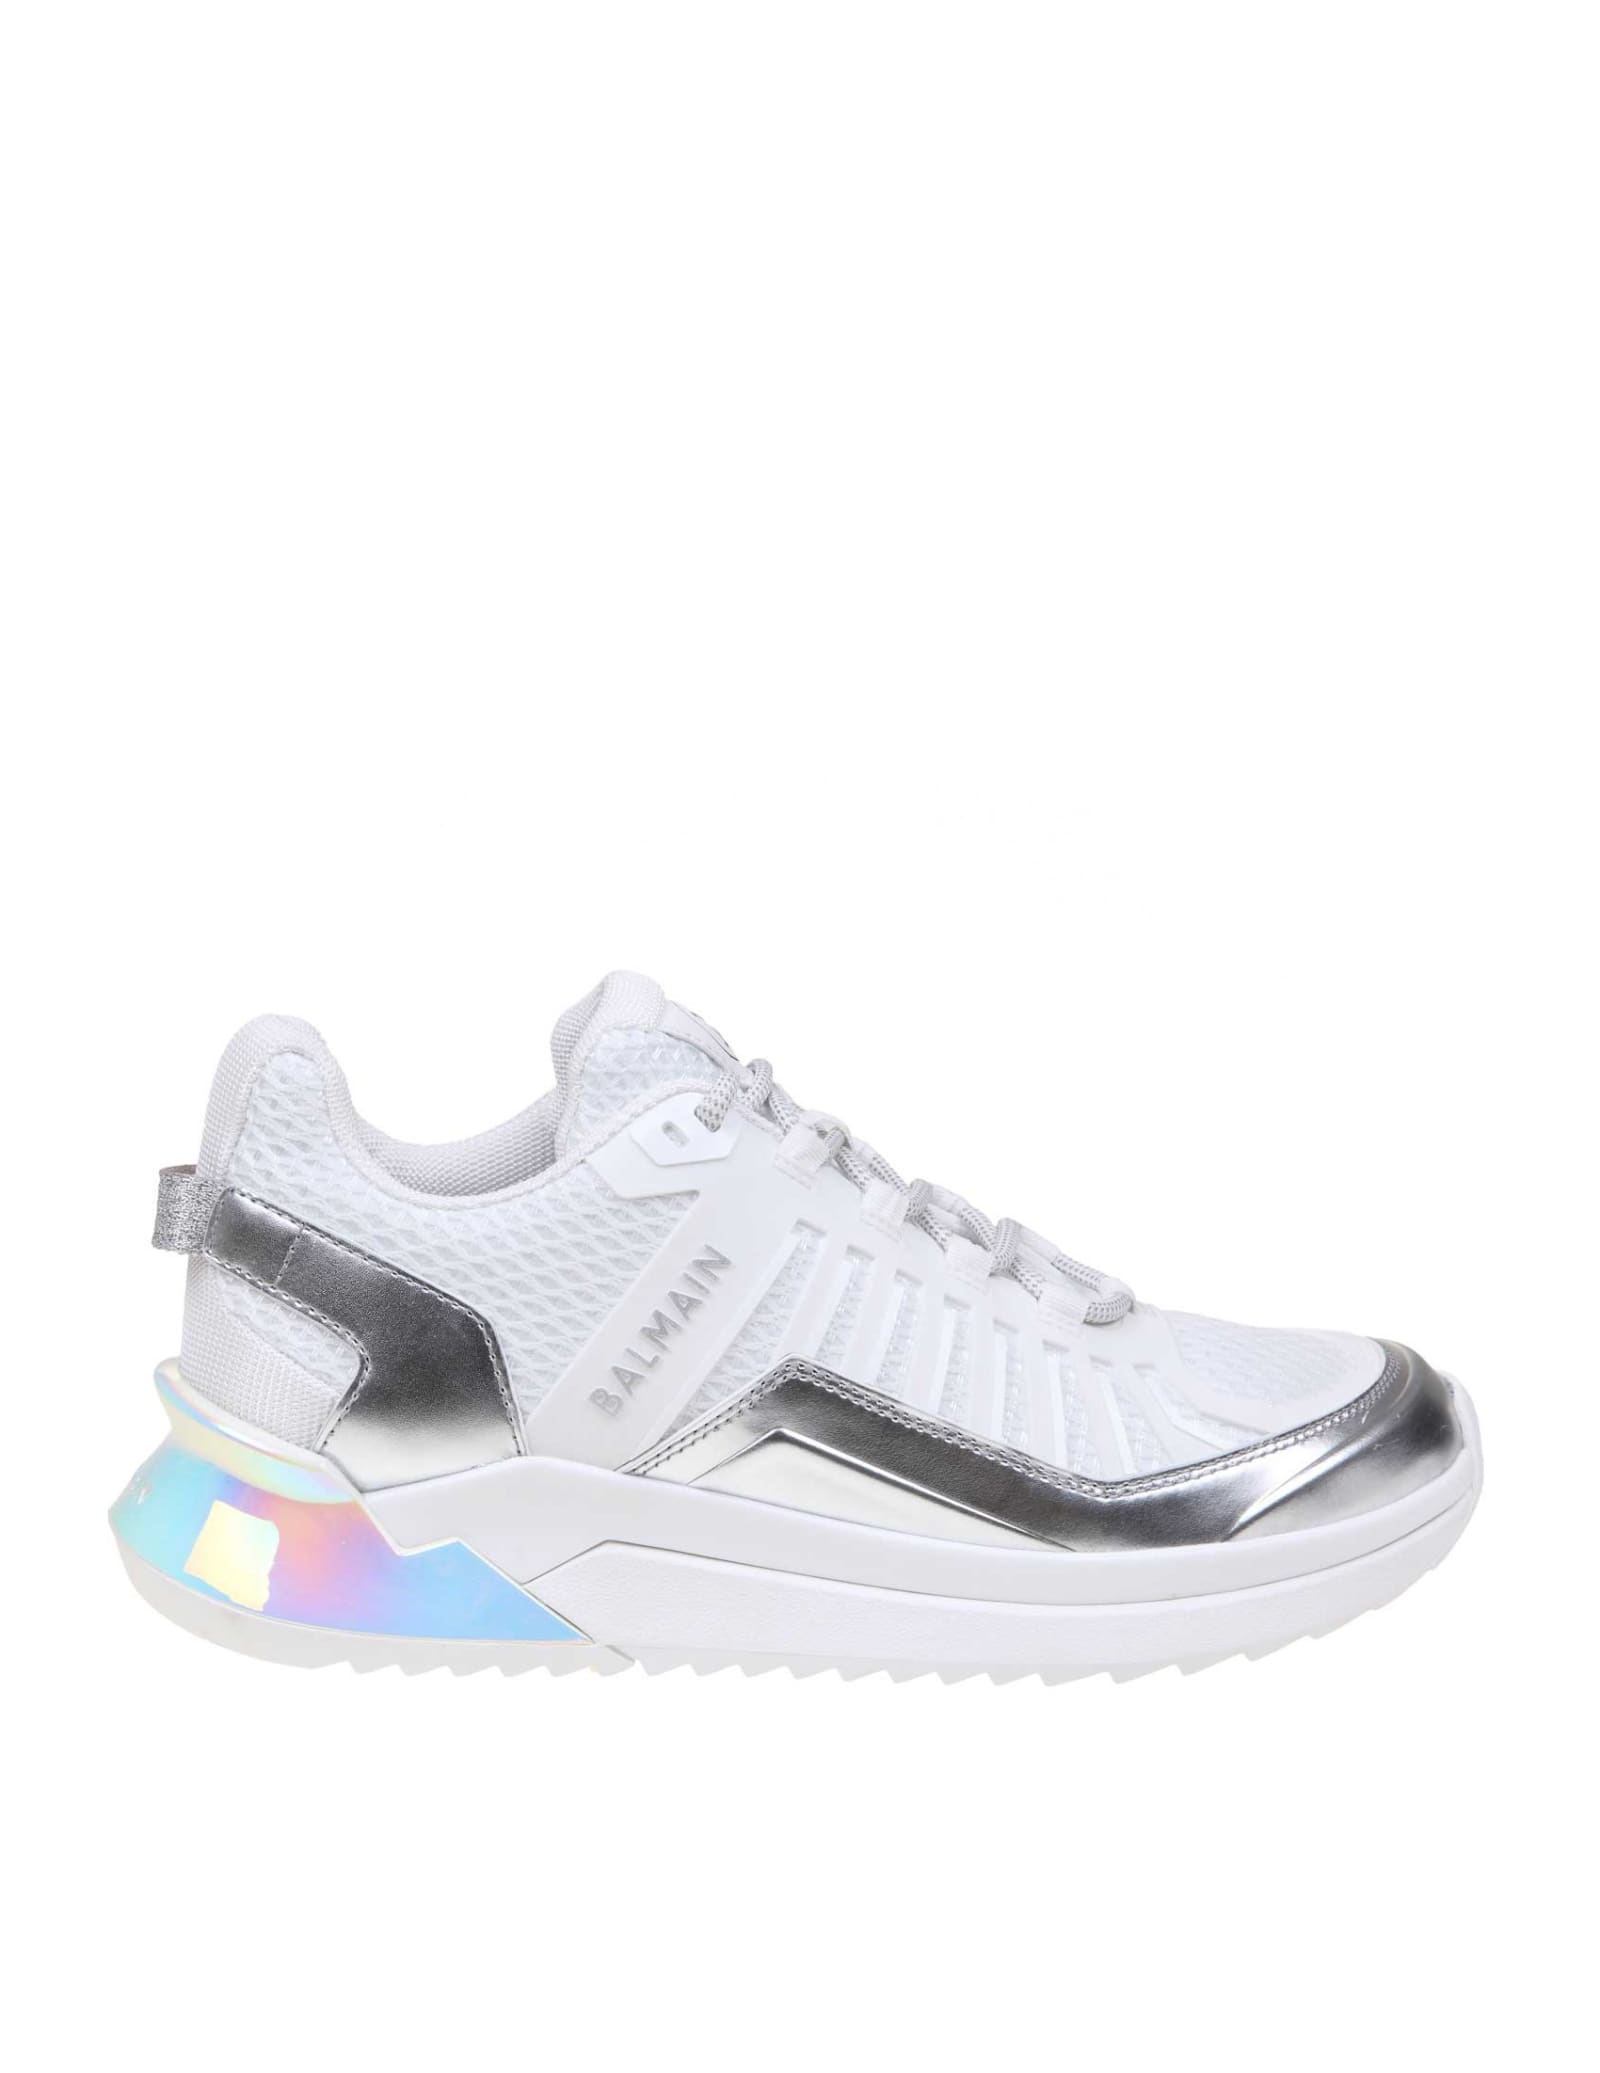 BALMAIN B-TRAIL trainers IN LEATHER AND WHITE FABRIC,11221979